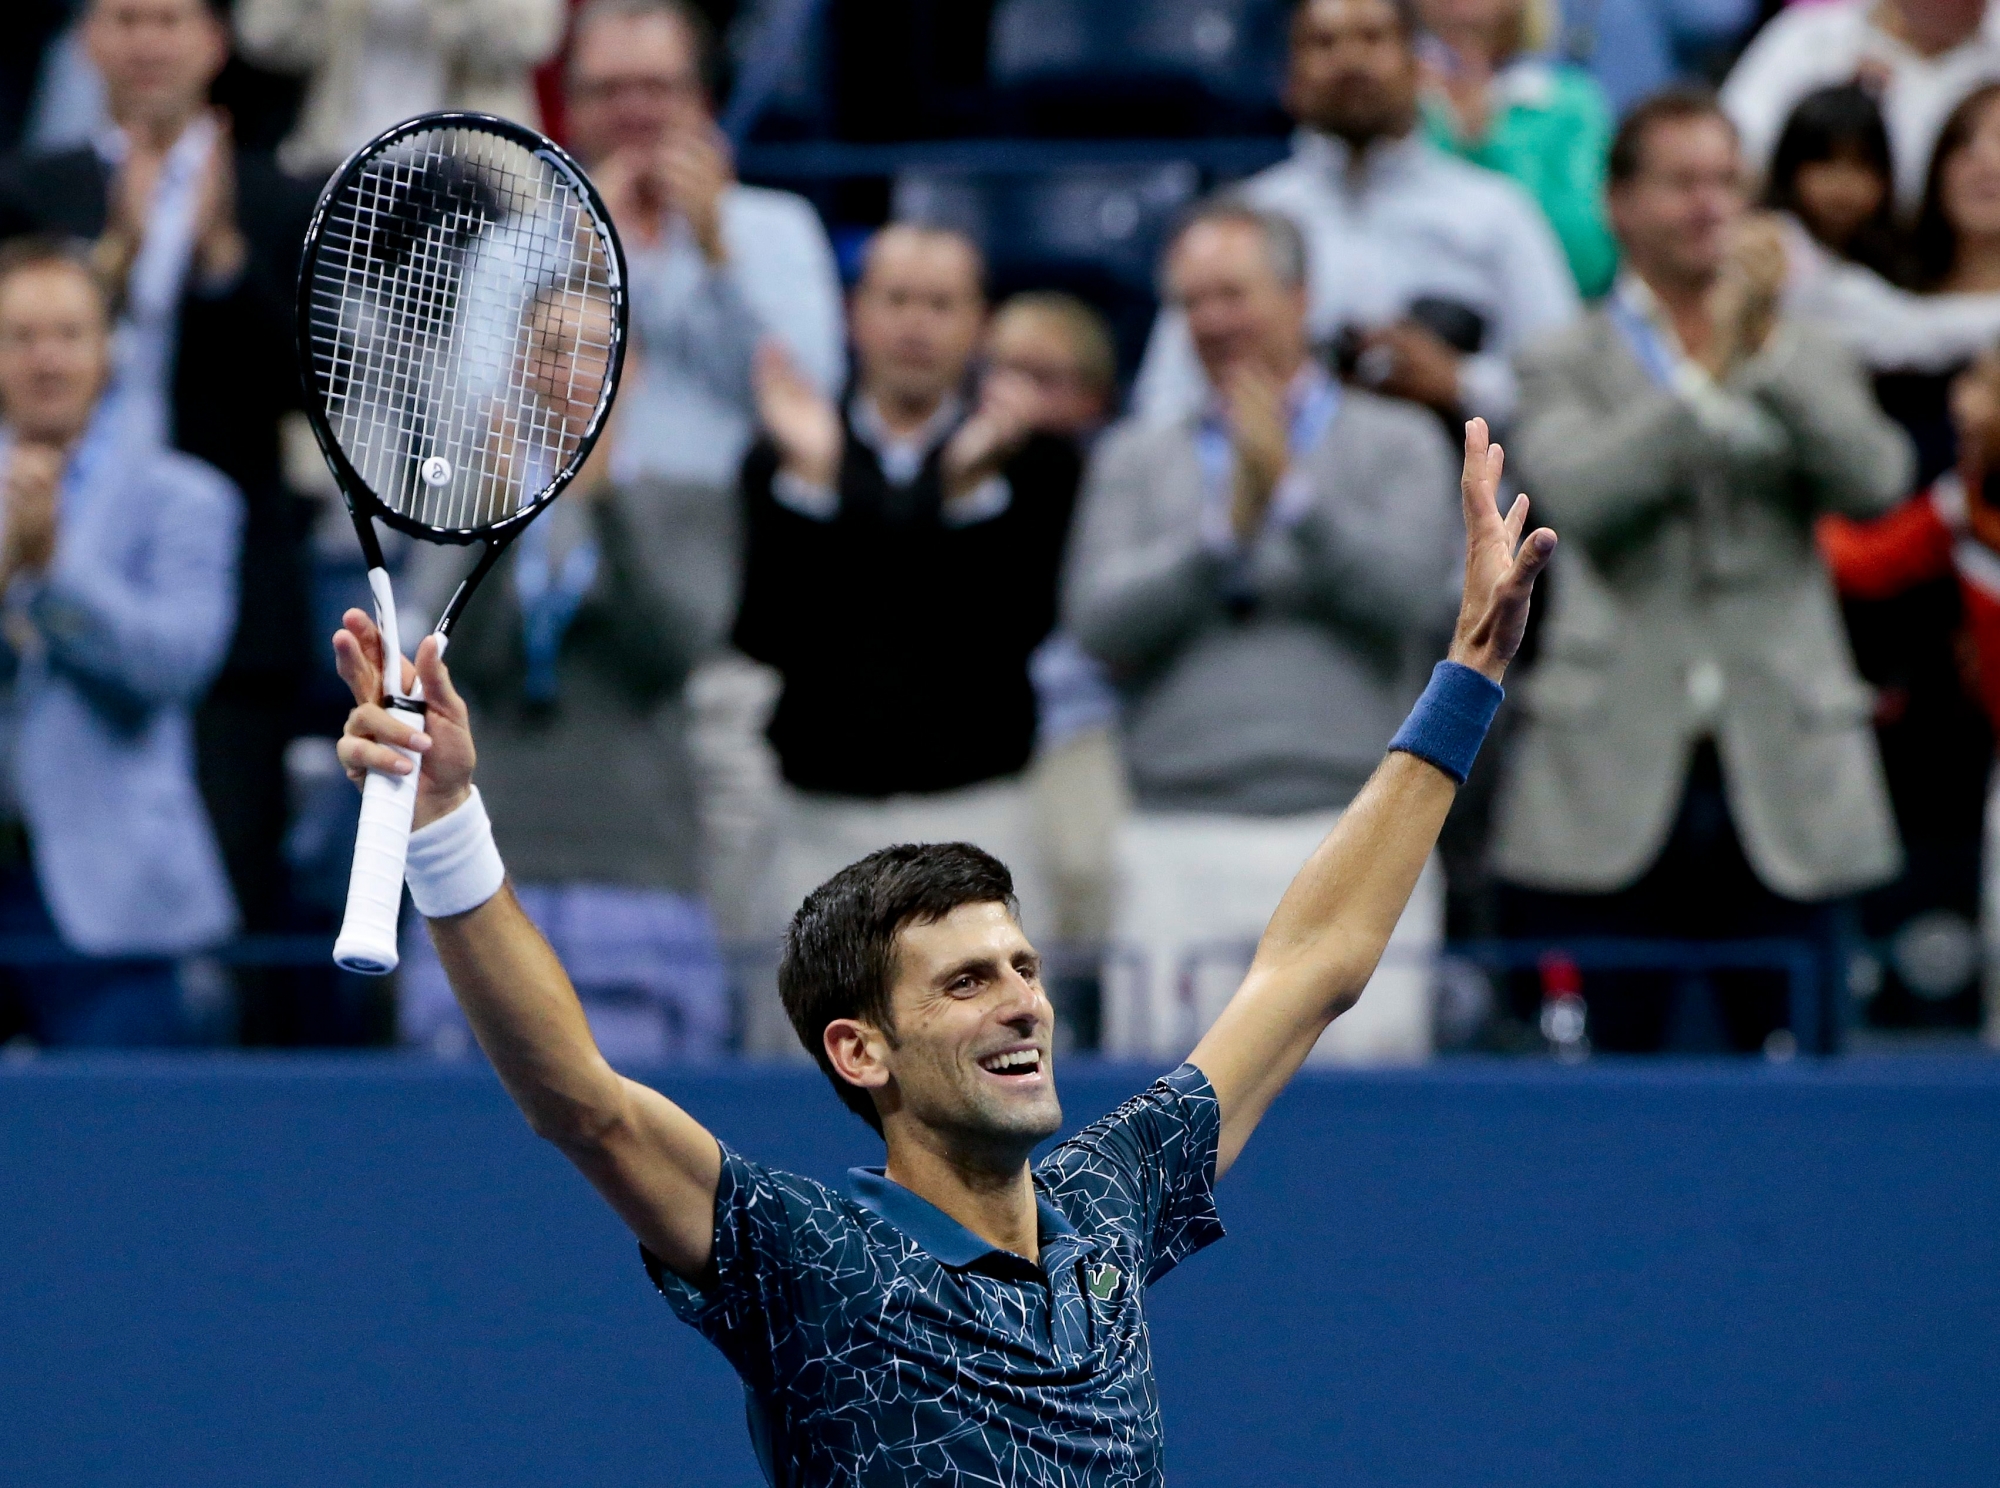 Novak Djokovic, of Serbia, celebrates after defeating gJuan Martin del Potro, of Argentina, during the men's final of the U.S. Open tennis tournament, Sunday, Sept. 9, 2018, in New York. (AP Photo/Andres Kudacki) US Open Tennis